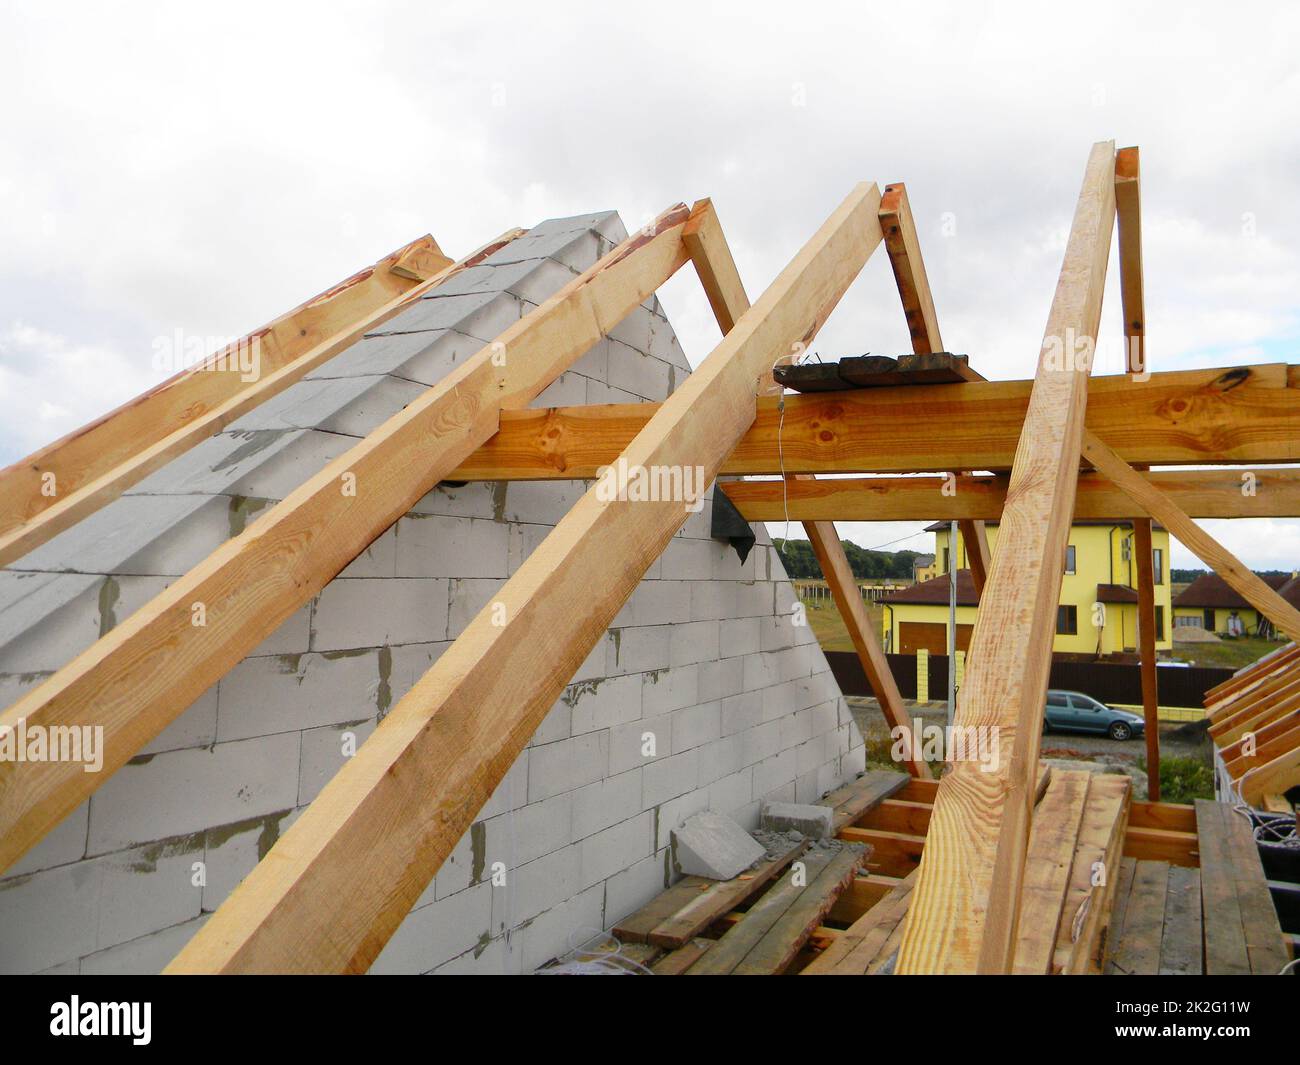 House roof top wooden frame construction. Unfinished house roofing construction wooden beams, trusses, timber. Stock Photo